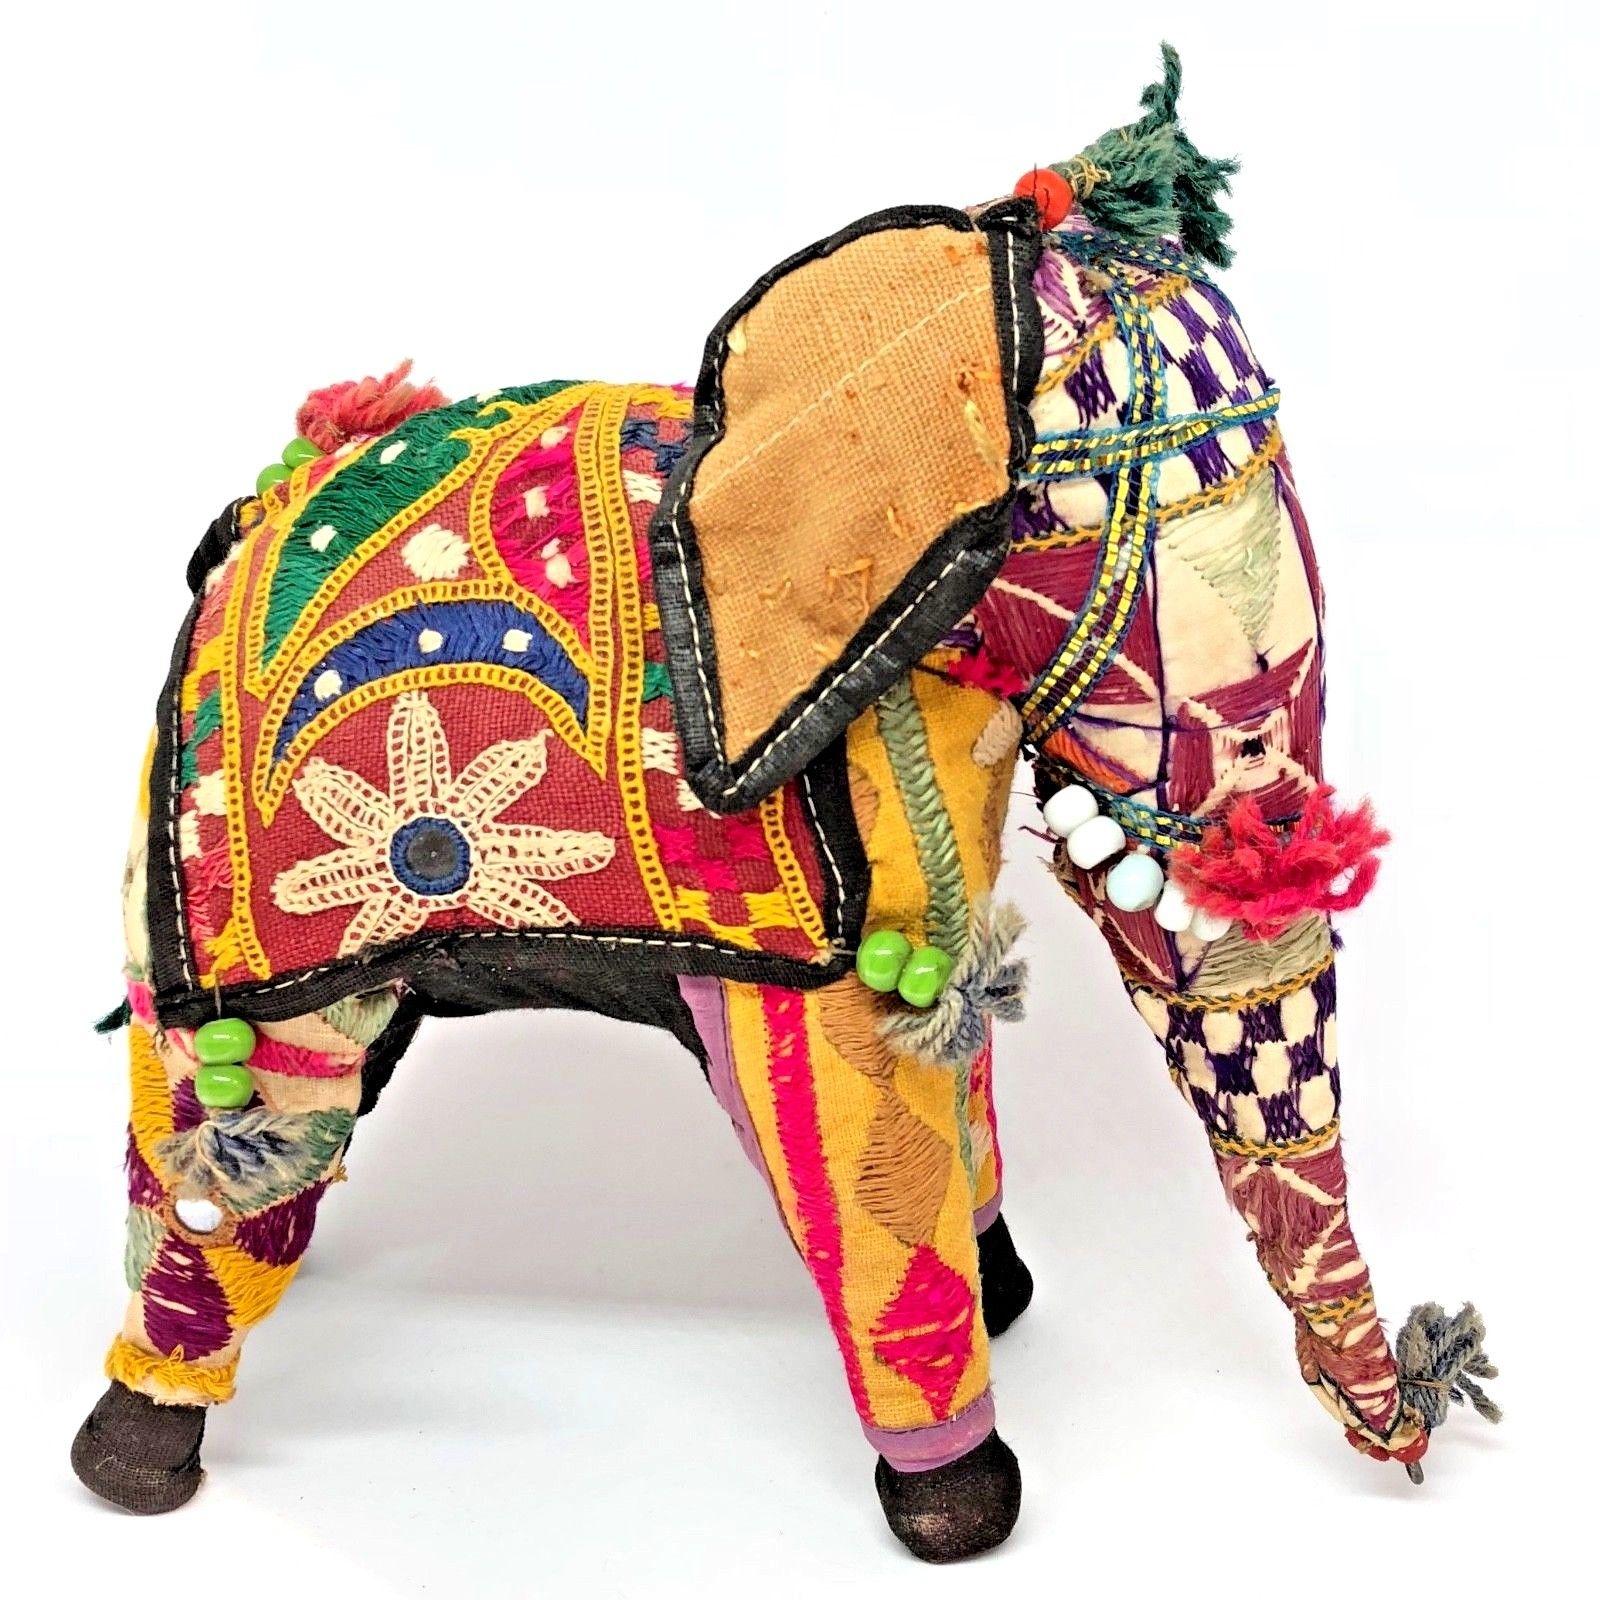 This handmade in India multi-color fabrics toy is truly a nice addition to your room . A vintage small elephant, stuffed, embroidered and decorated with small mirrors and glass pearls, great collector piece. Ceremonial elephant toy, Folk Art, circa